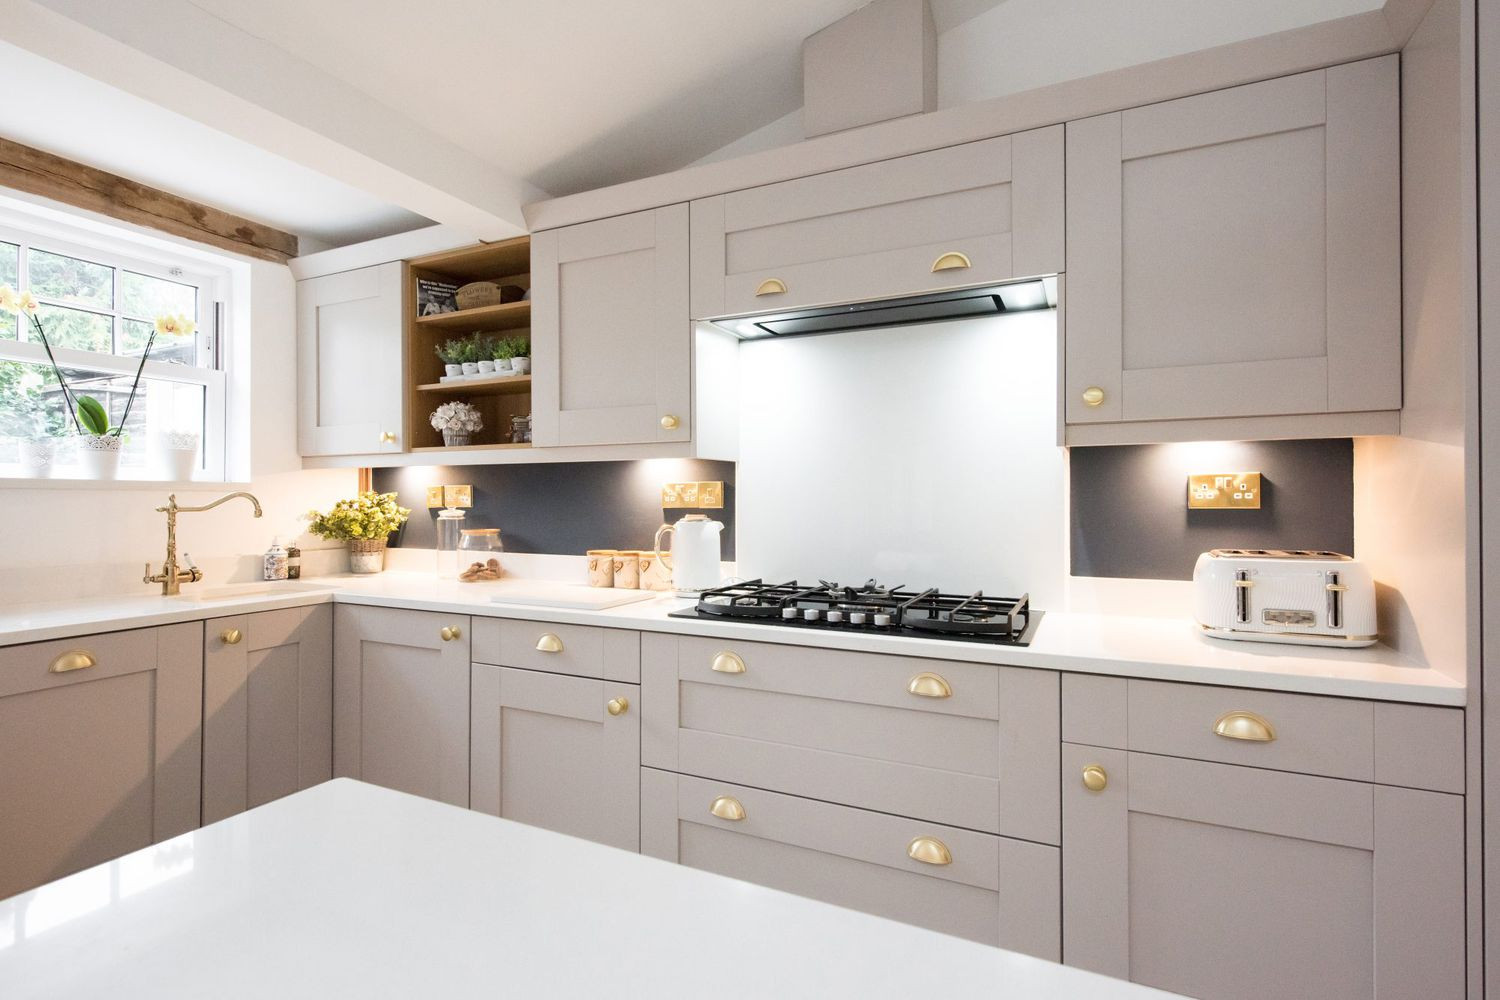 Best Kitchen Cabinet Paint Colors, According to Interior Designers